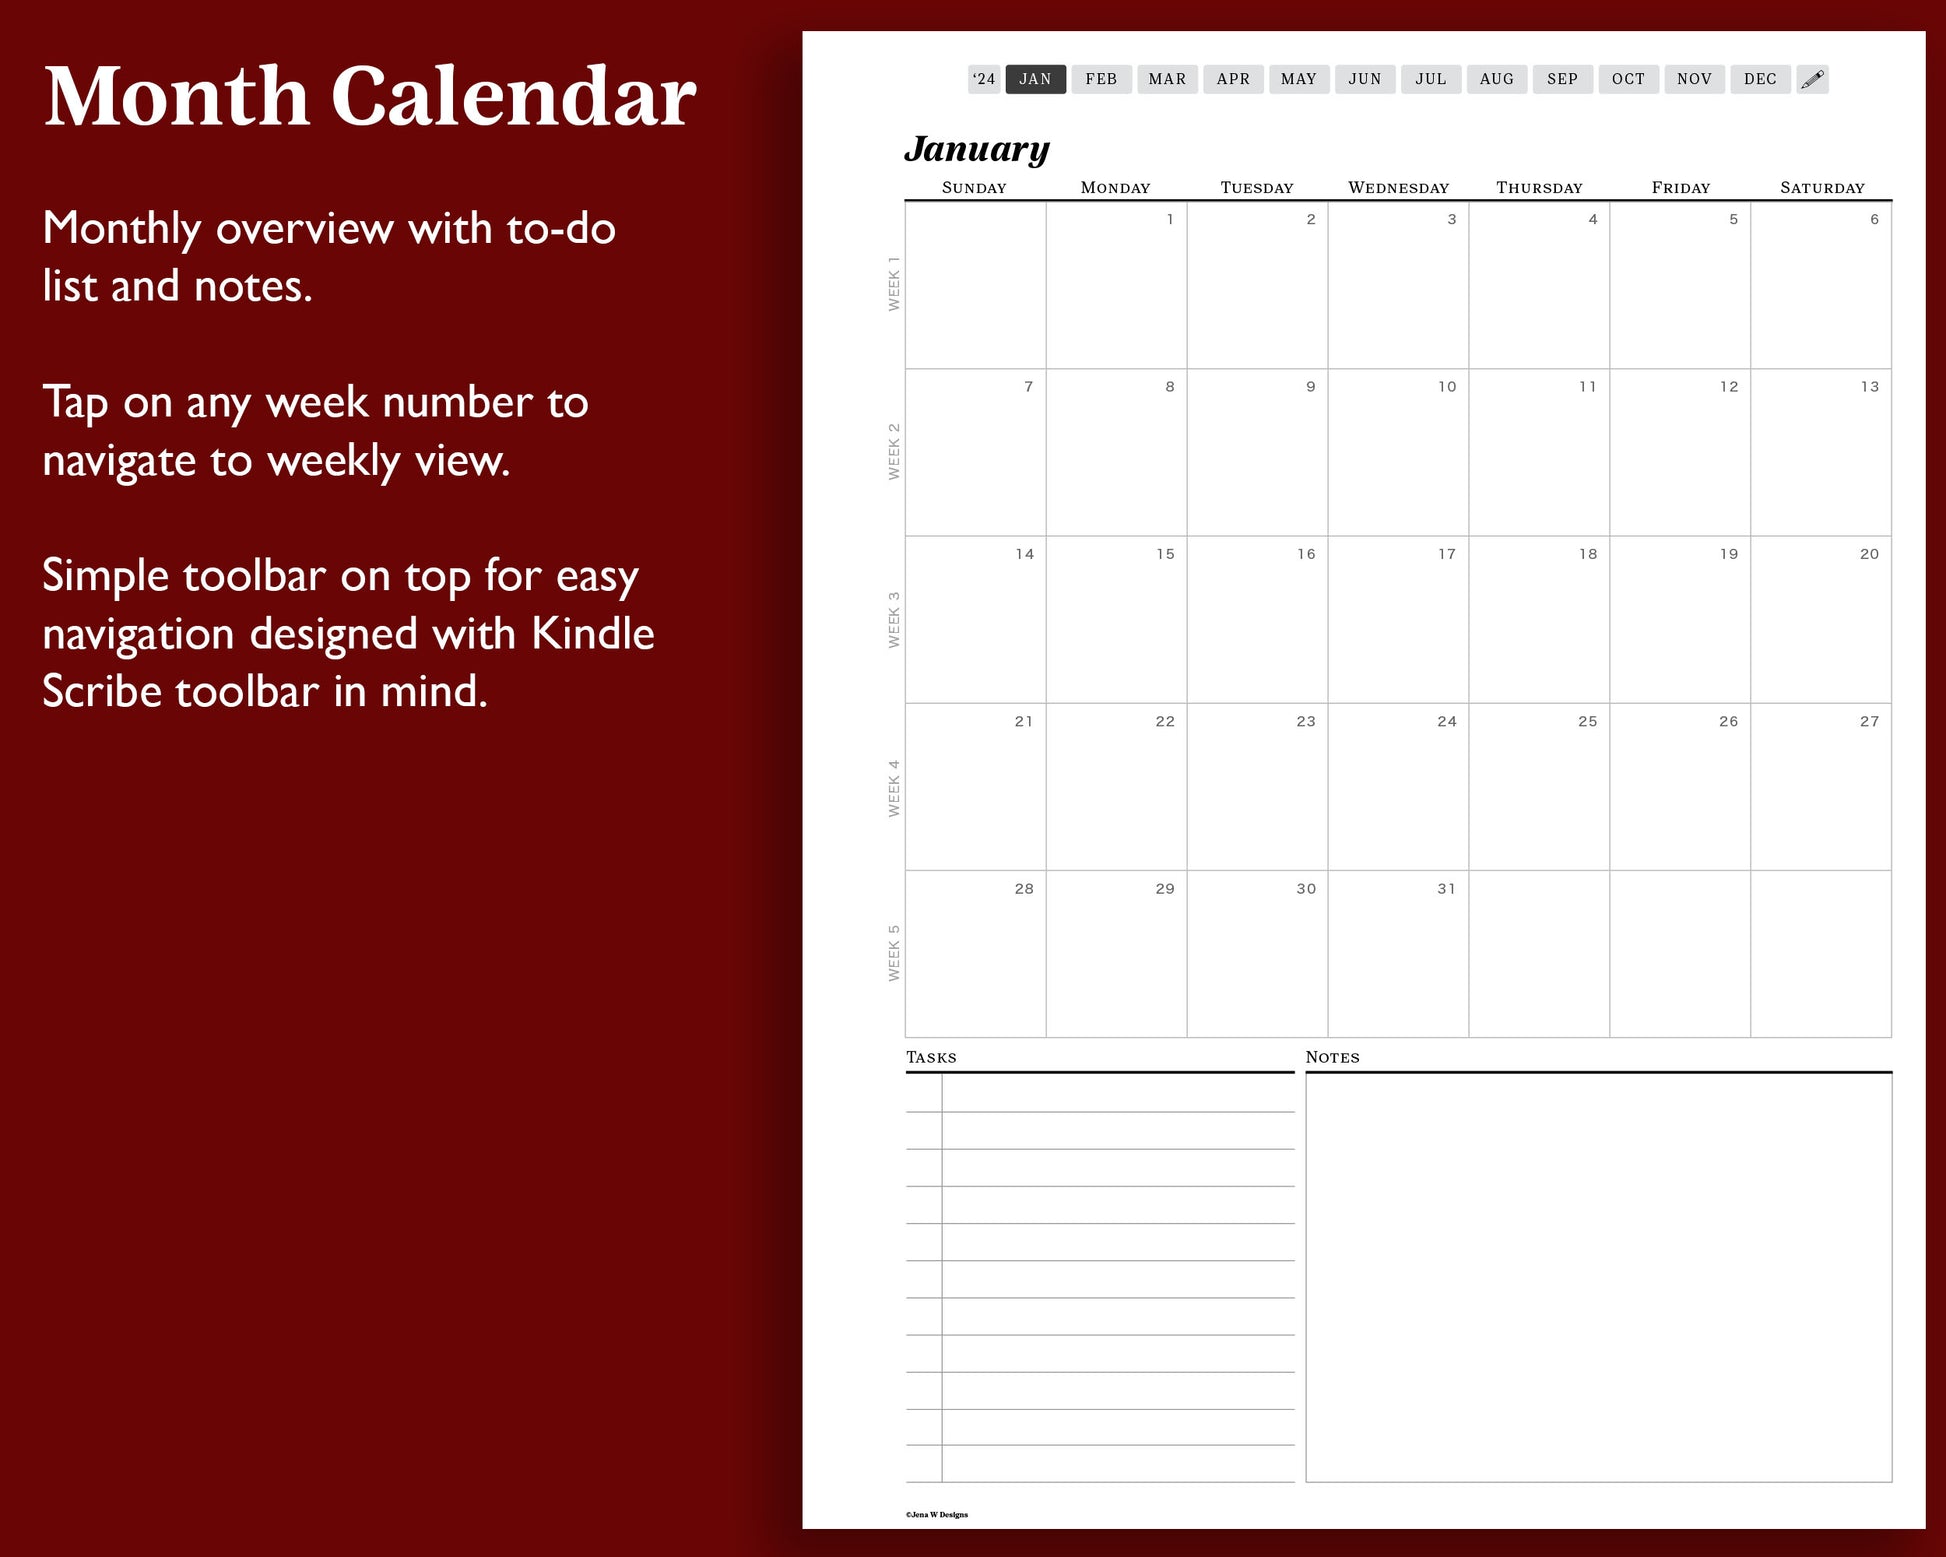 2024 Kindle Scribe Monthly Planner